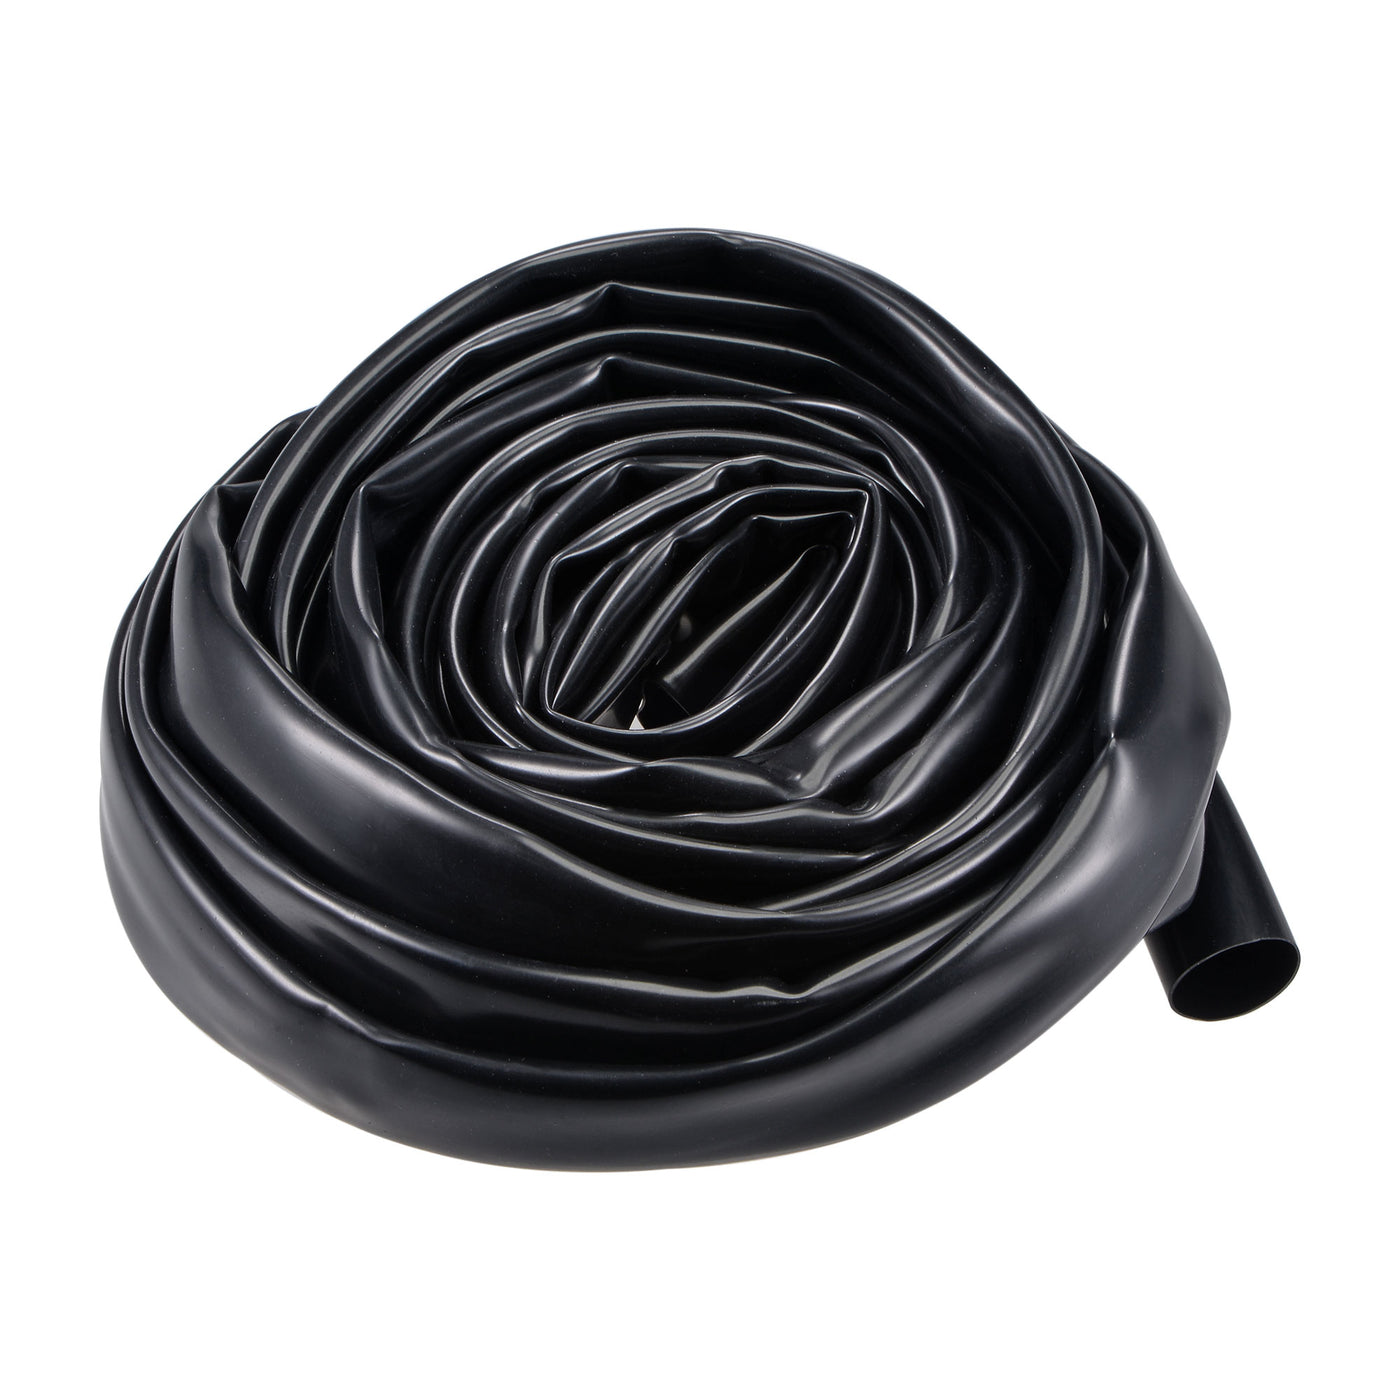 Uxcell Uxcell Black PVC Tube Wire Harness Tubing, 18mm ID 23ft Sleeve for Wire Sheathing Wire Protection